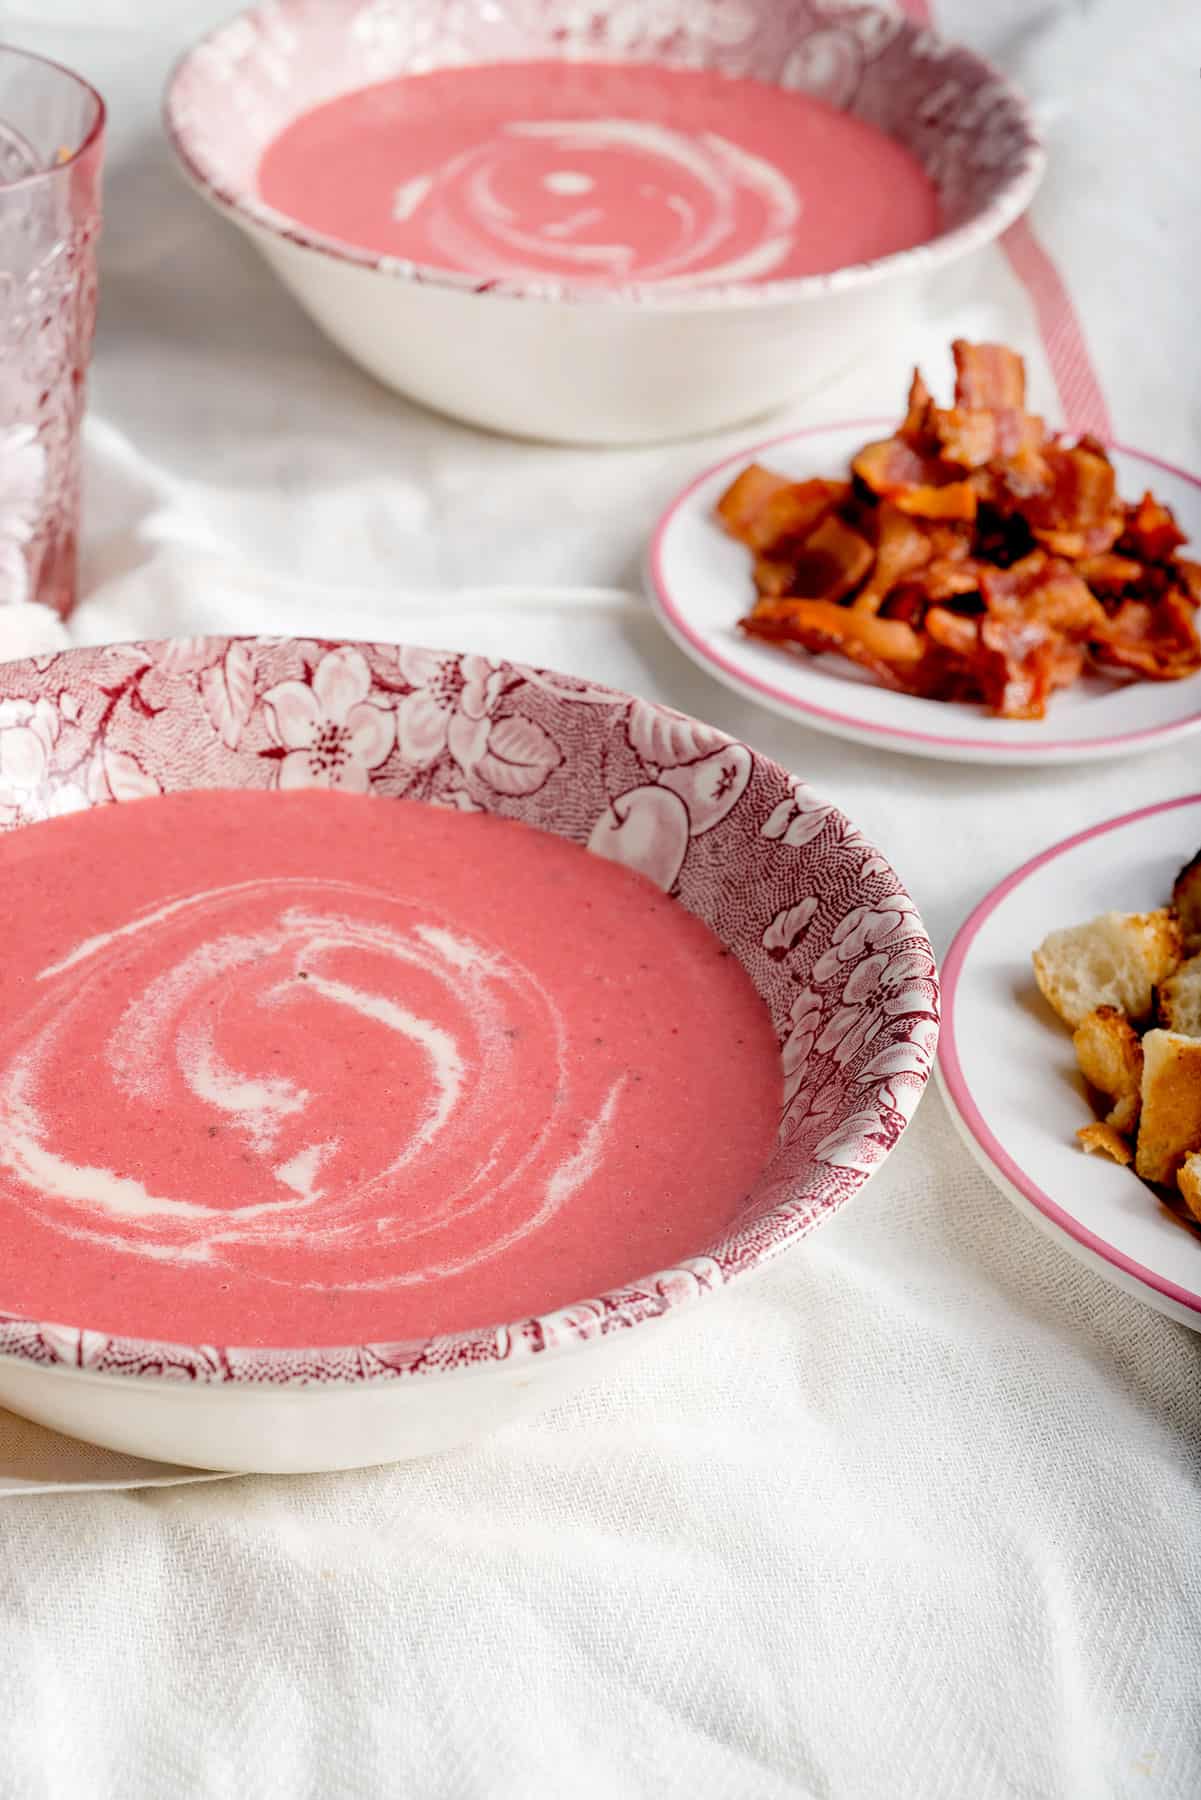 Cream of beetroot soup.